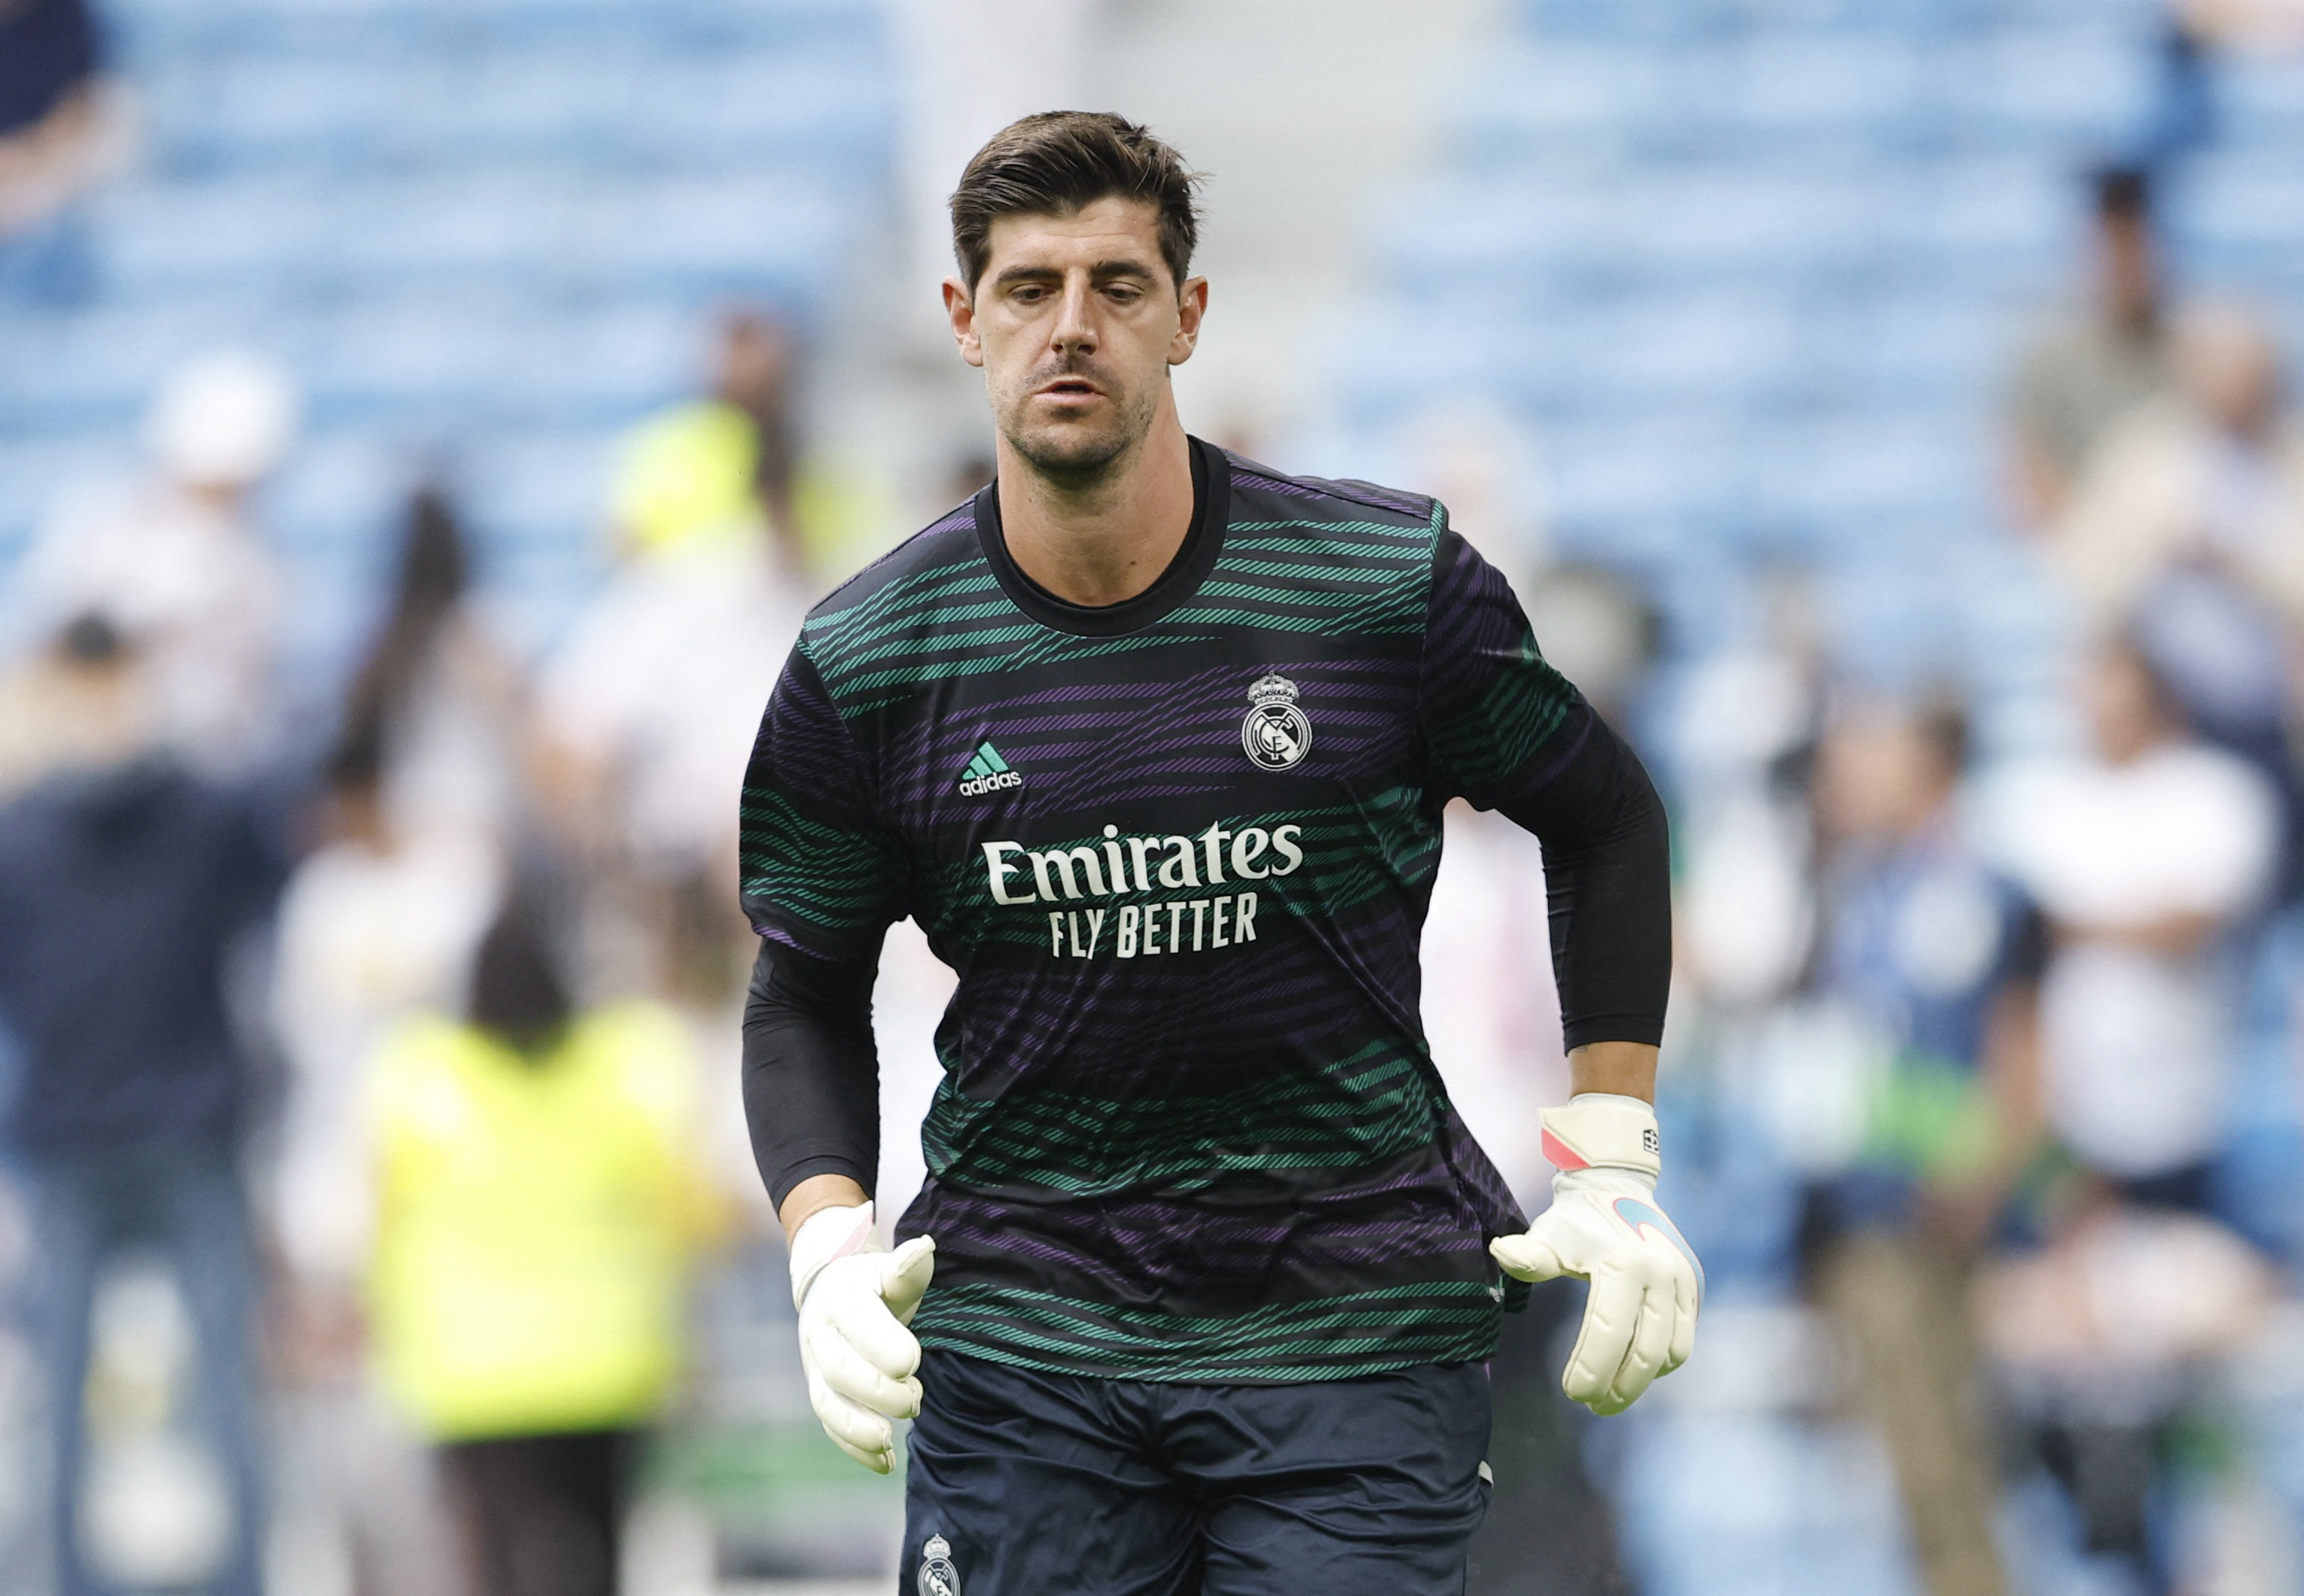 Real goalkeeper Courtois sidelined for several months with torn ACL ...